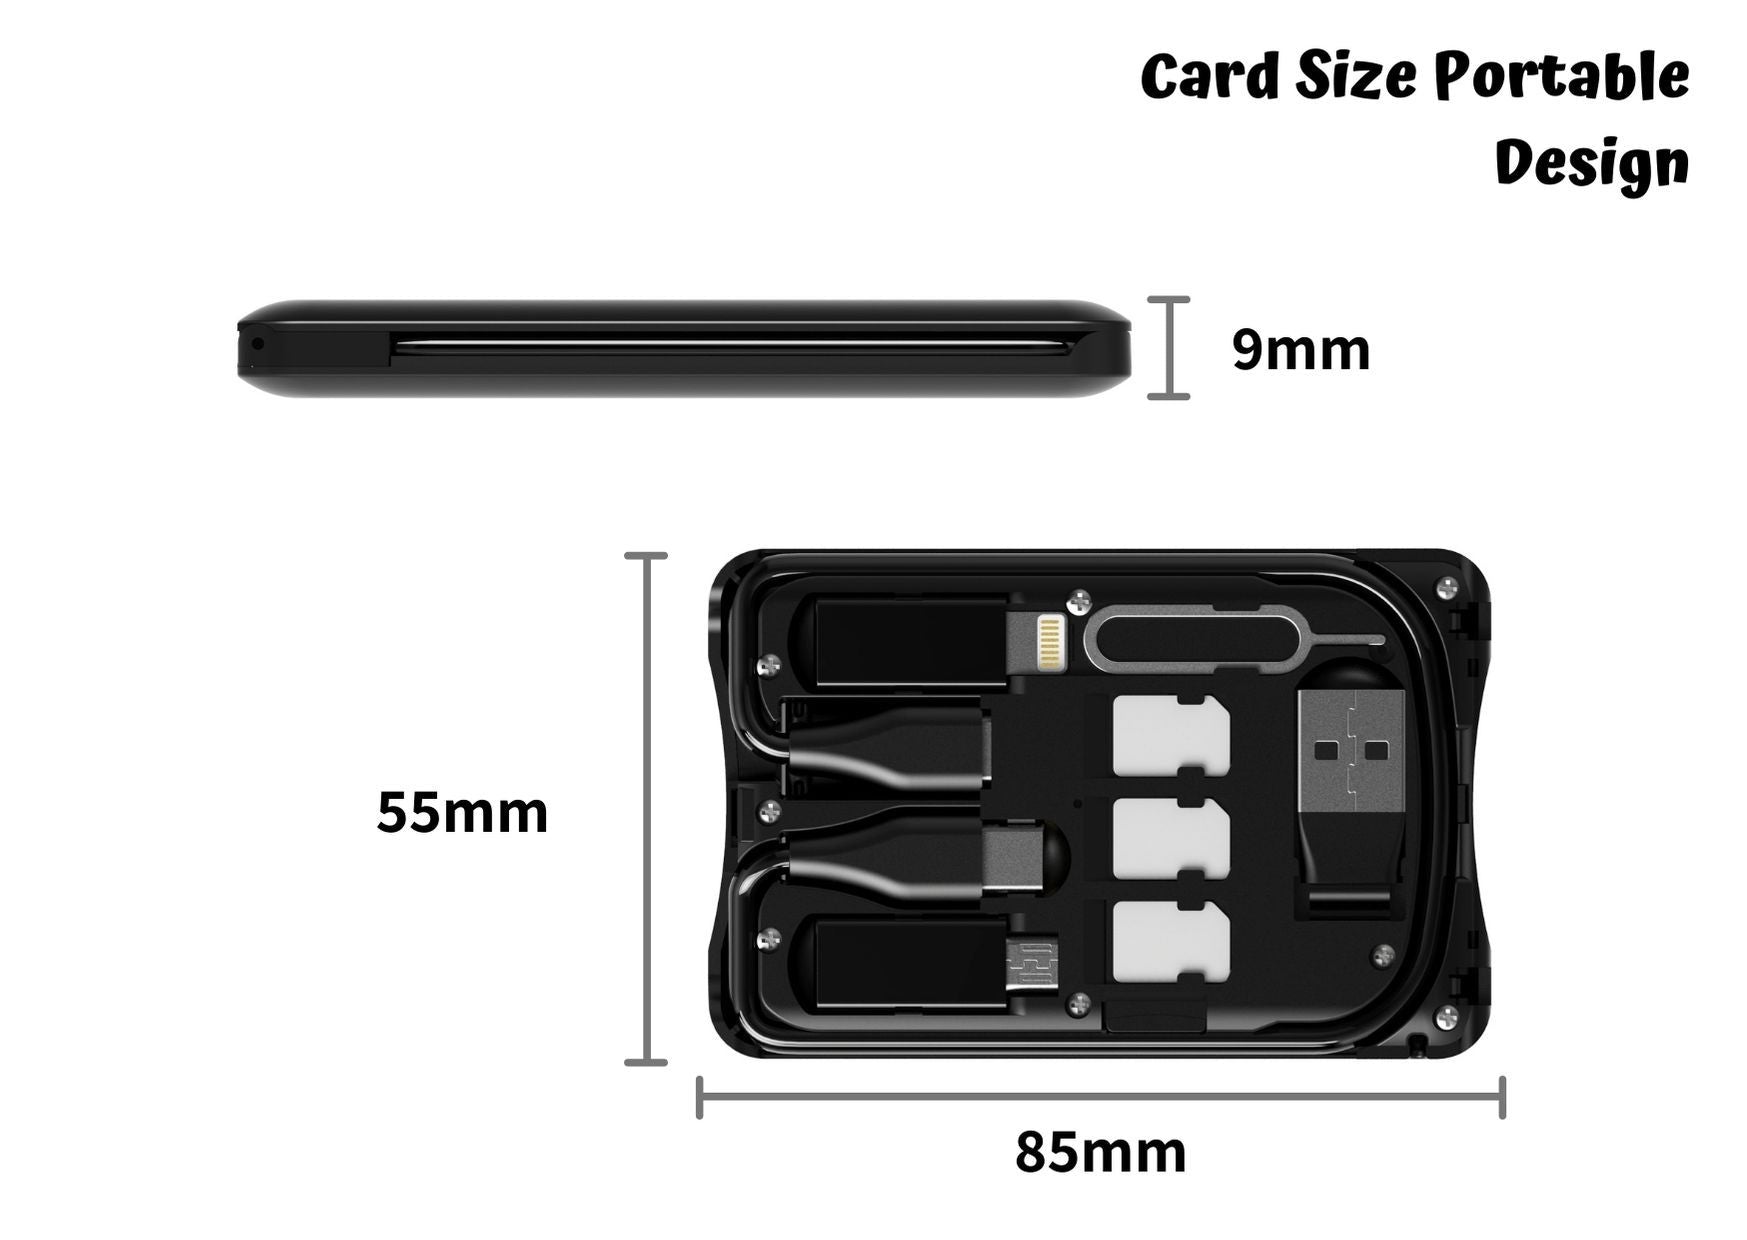 dimbuyshop Portable Multi functional Cable SIM Card Adapter card size portable cable storage wireless charging cover photo portable design